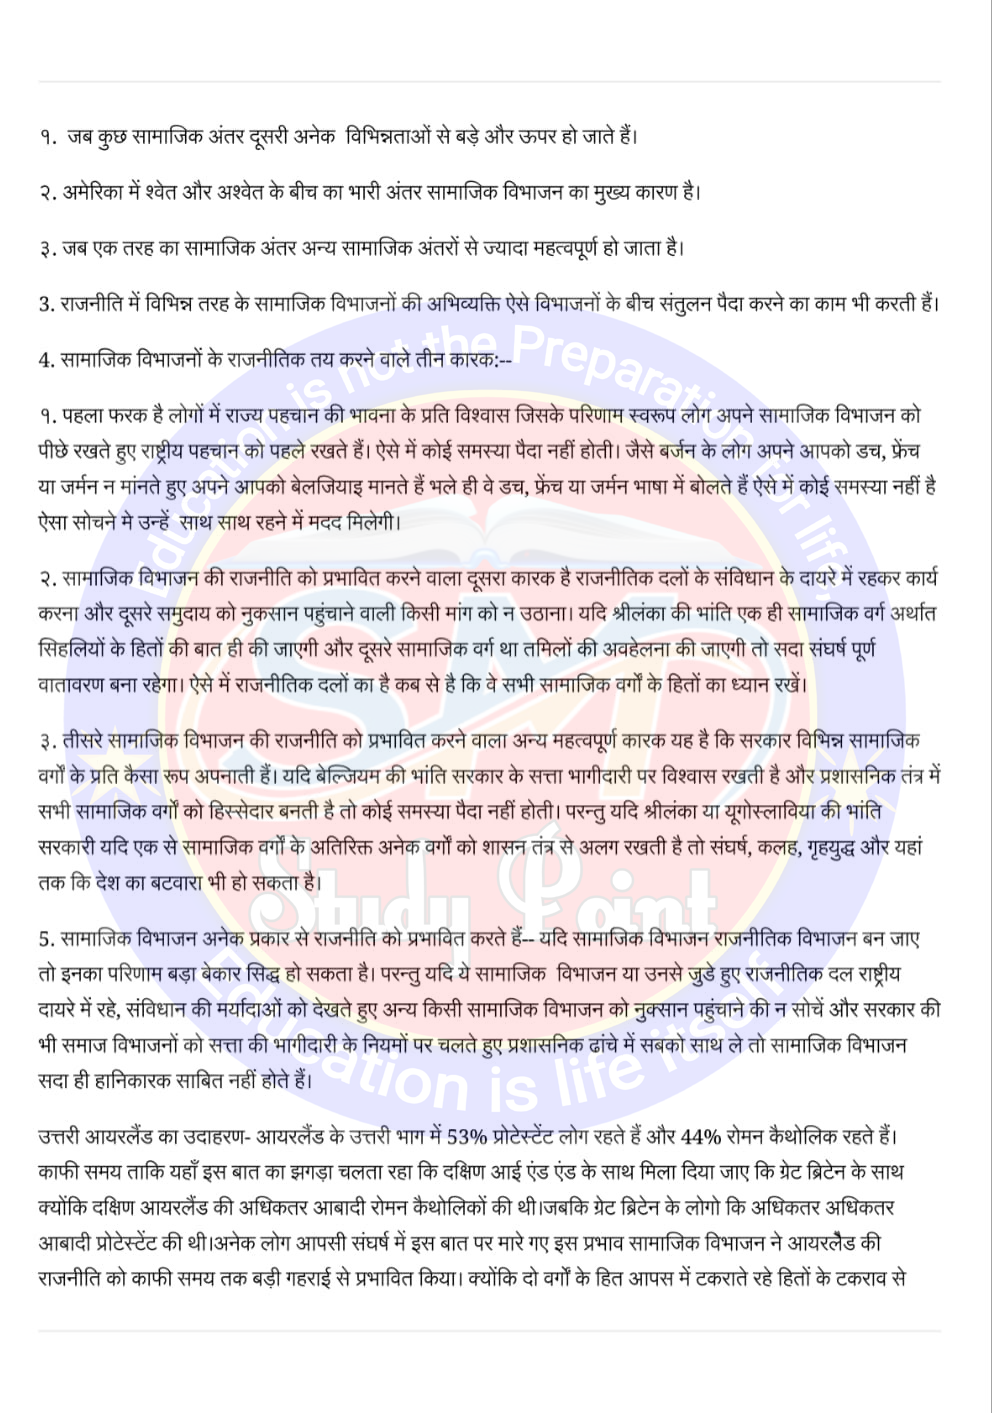 Class 10th Political Science Notes in Hindi | Political Science Notes PDF Download | Bihar Board Class 10 Political Science Notes Free Download